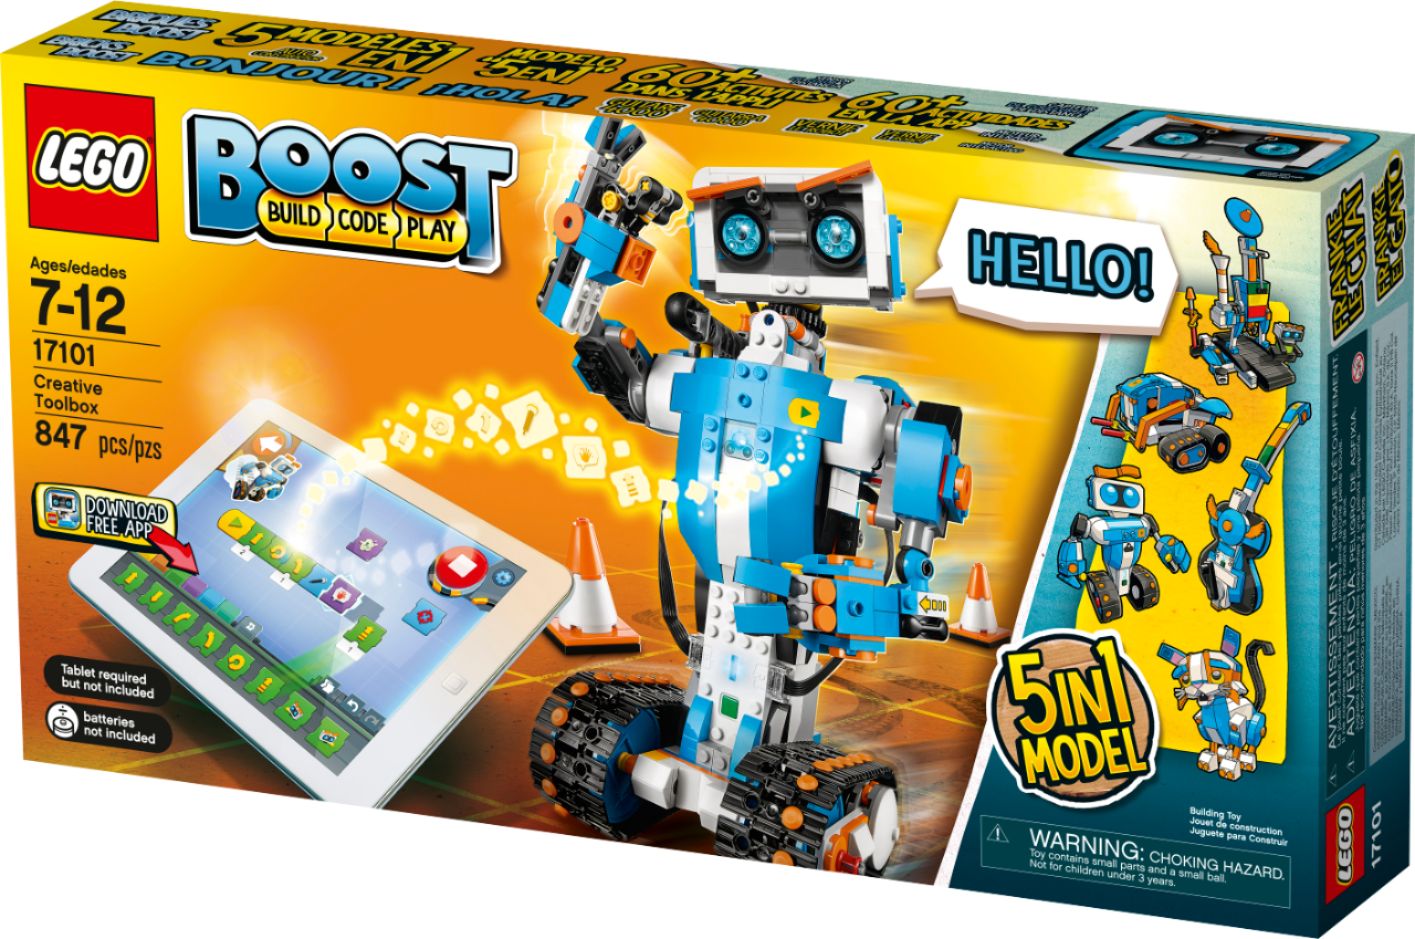 Left View: LEGO - BOOST Creative Toolbox Building Set 17101